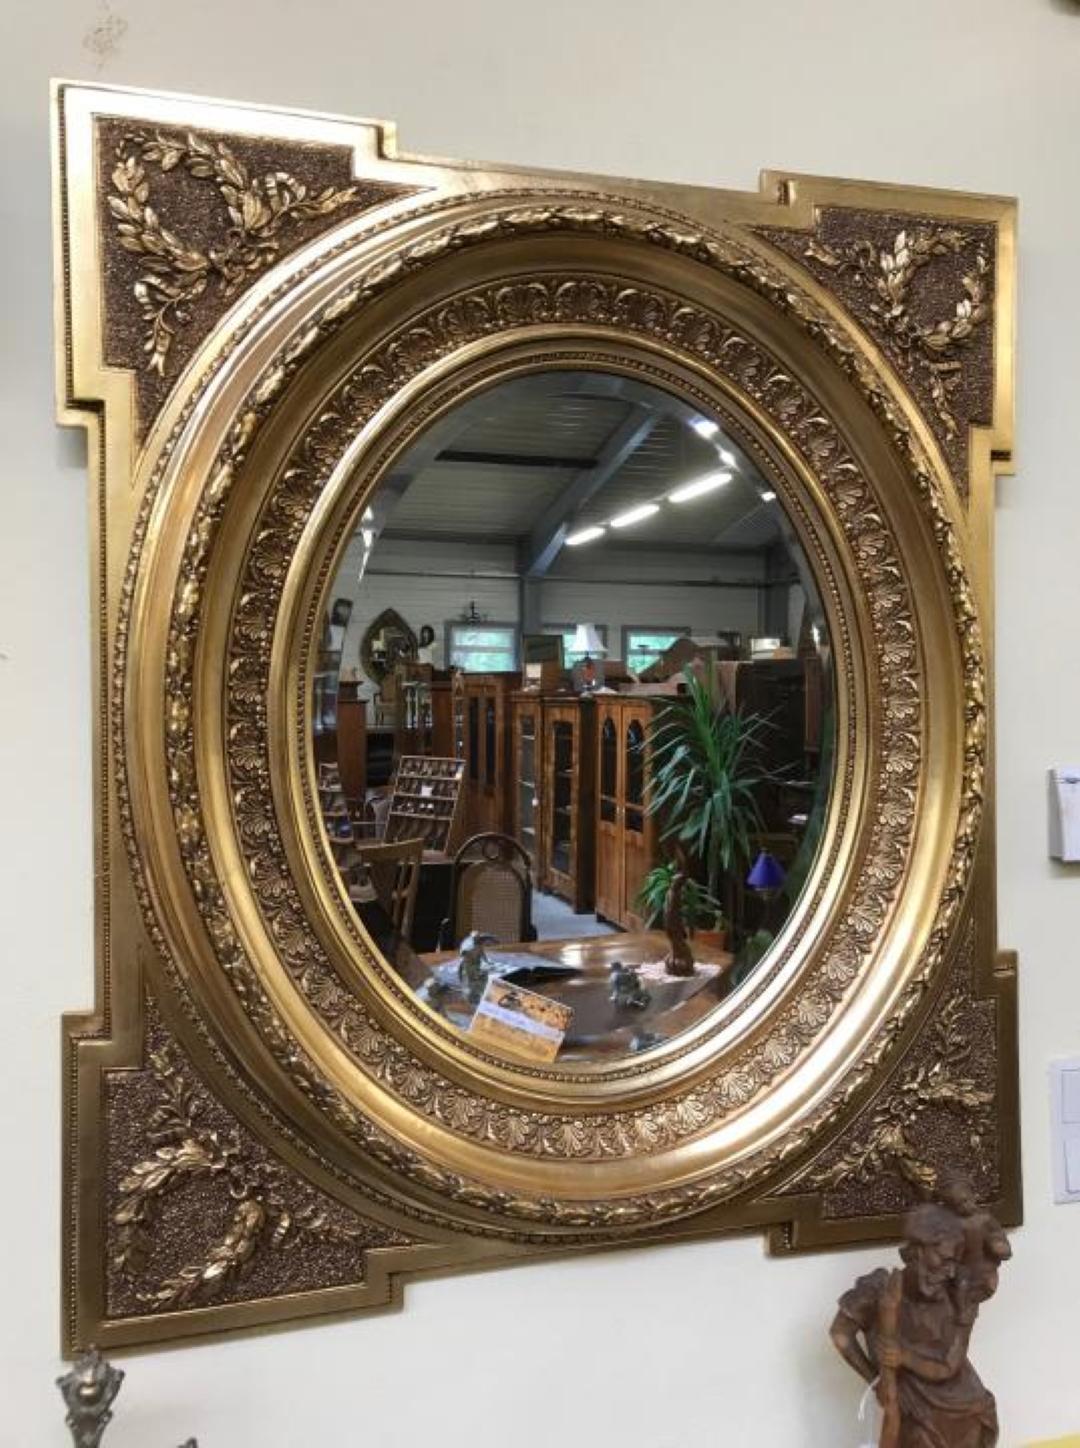 Original magnificent gilded florentine mirror around 1855. Authentic piece!
This is a very beautiful wooden Florentine frame with beautiful floral carvings
and features a 23 carat original polyamide gilding. This mirror is in perfect condition!